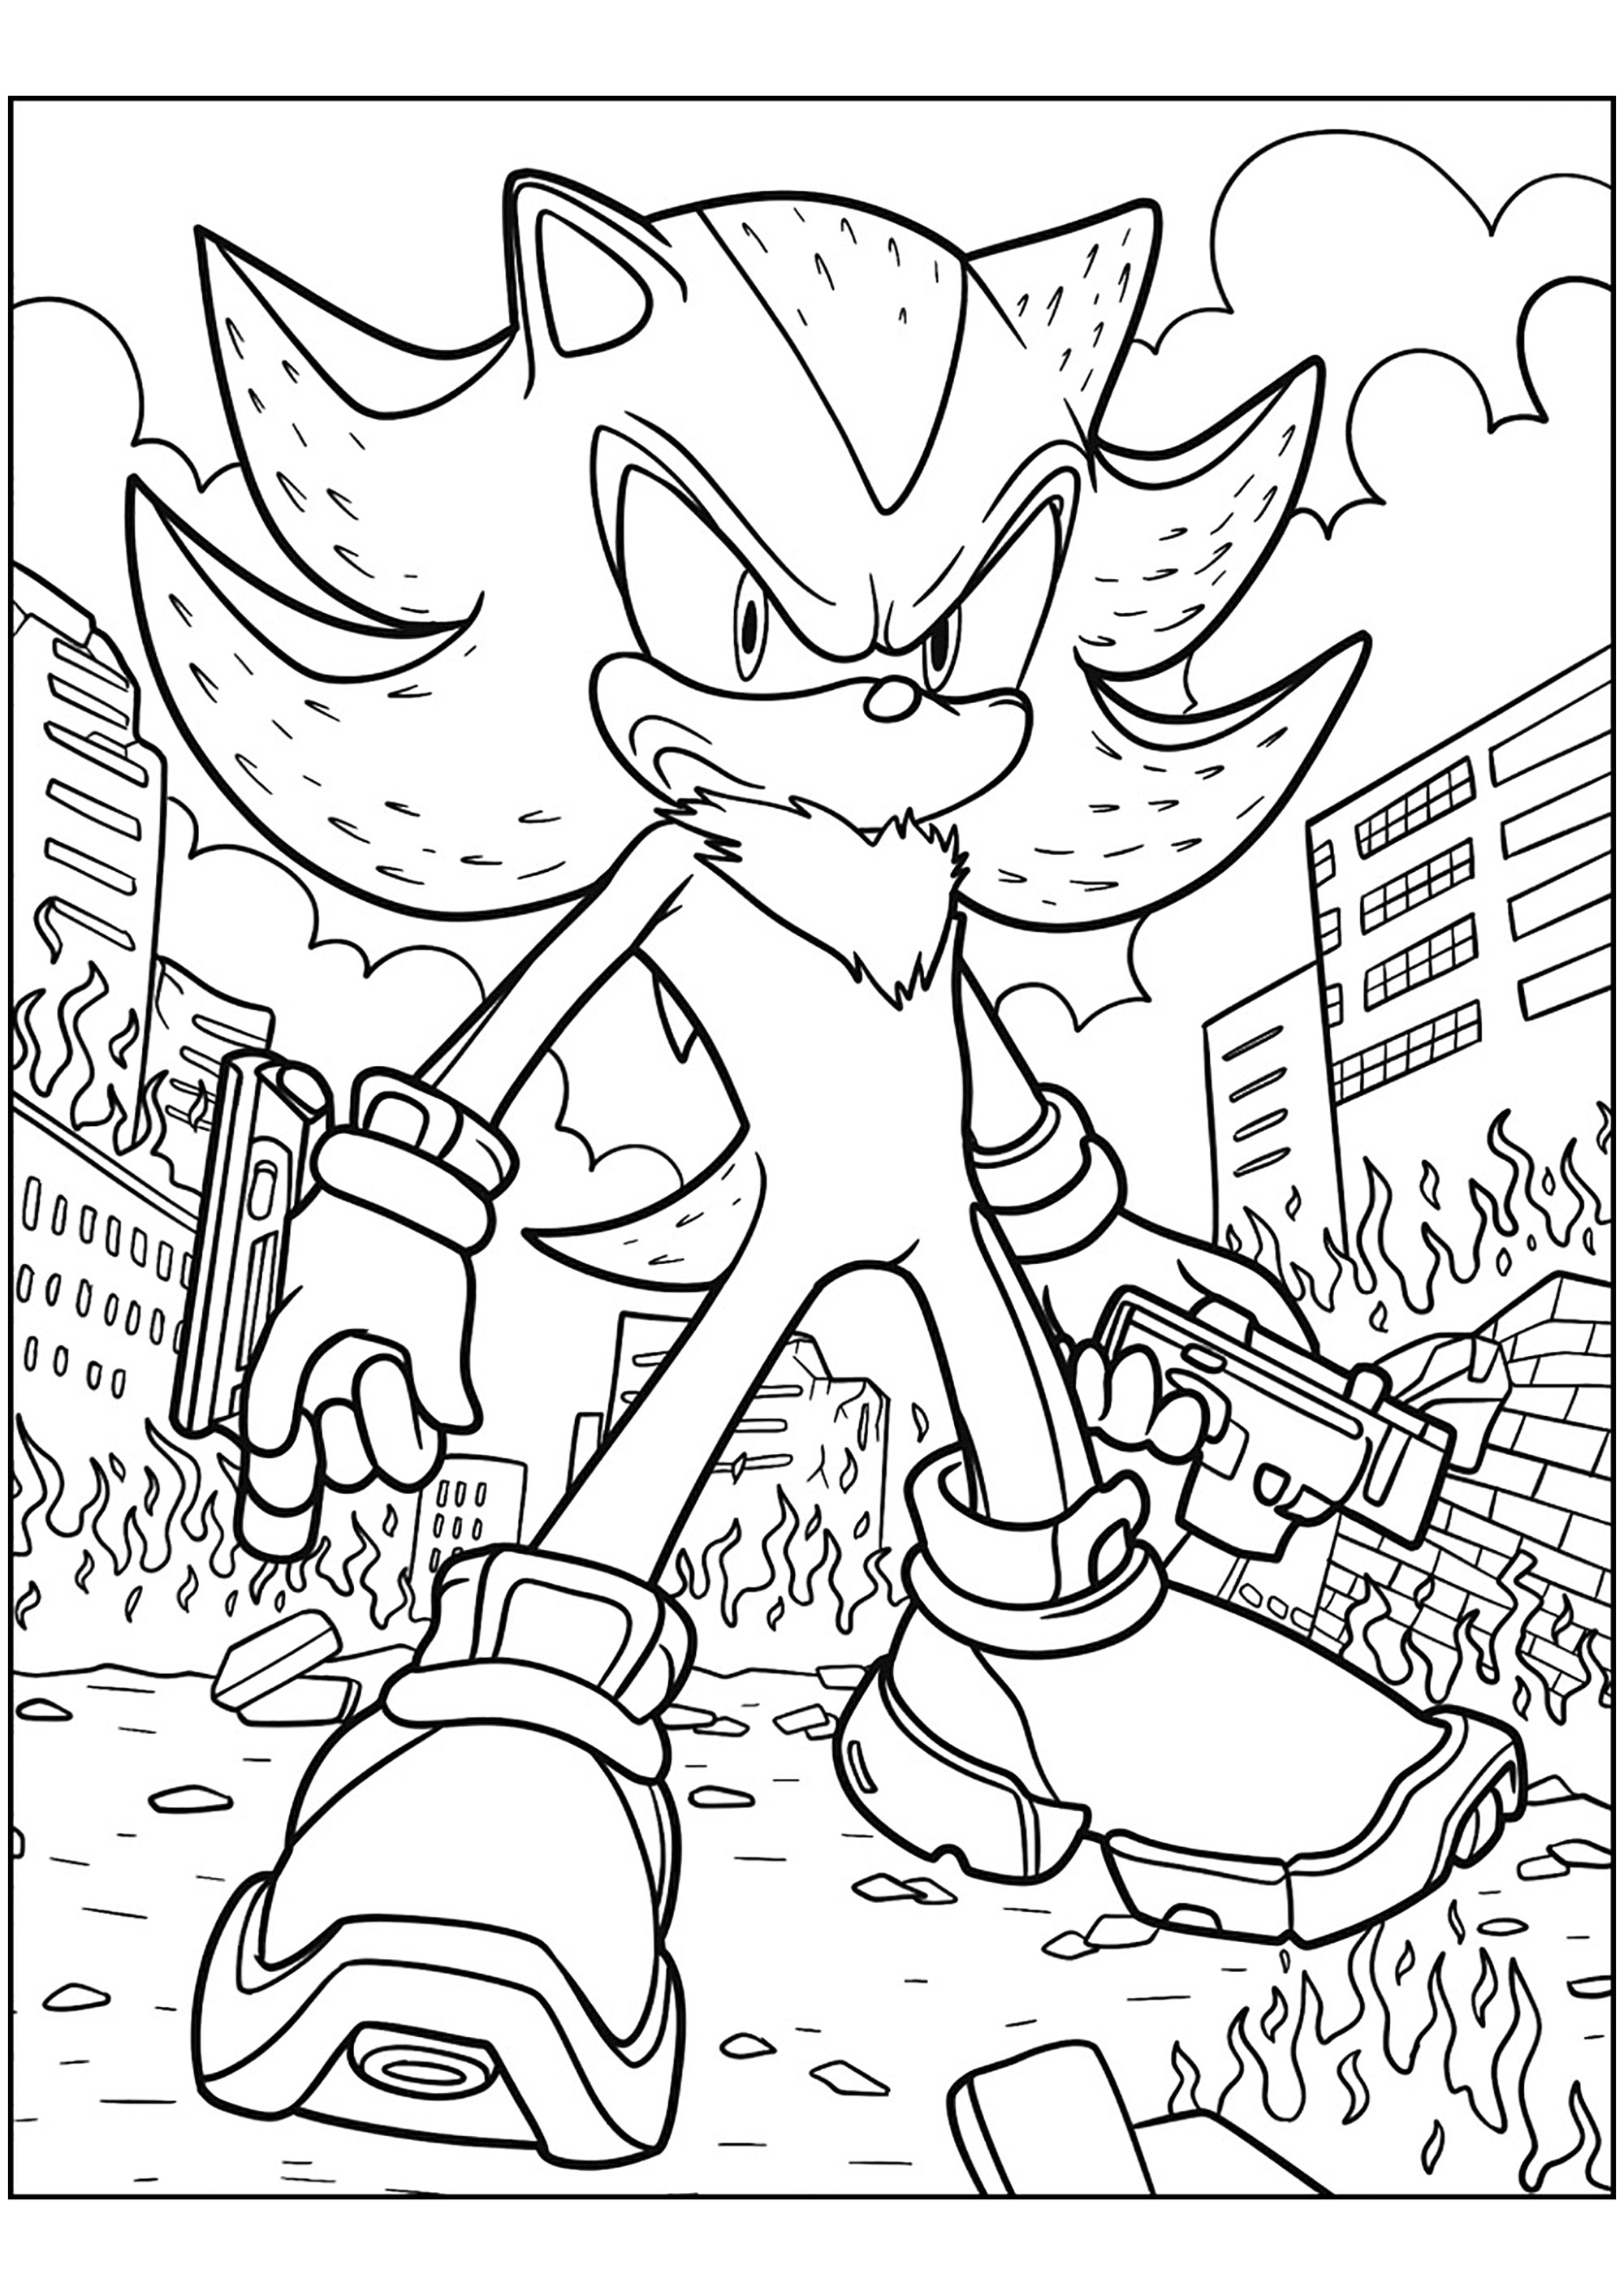 Shadow the hedgehog in a city